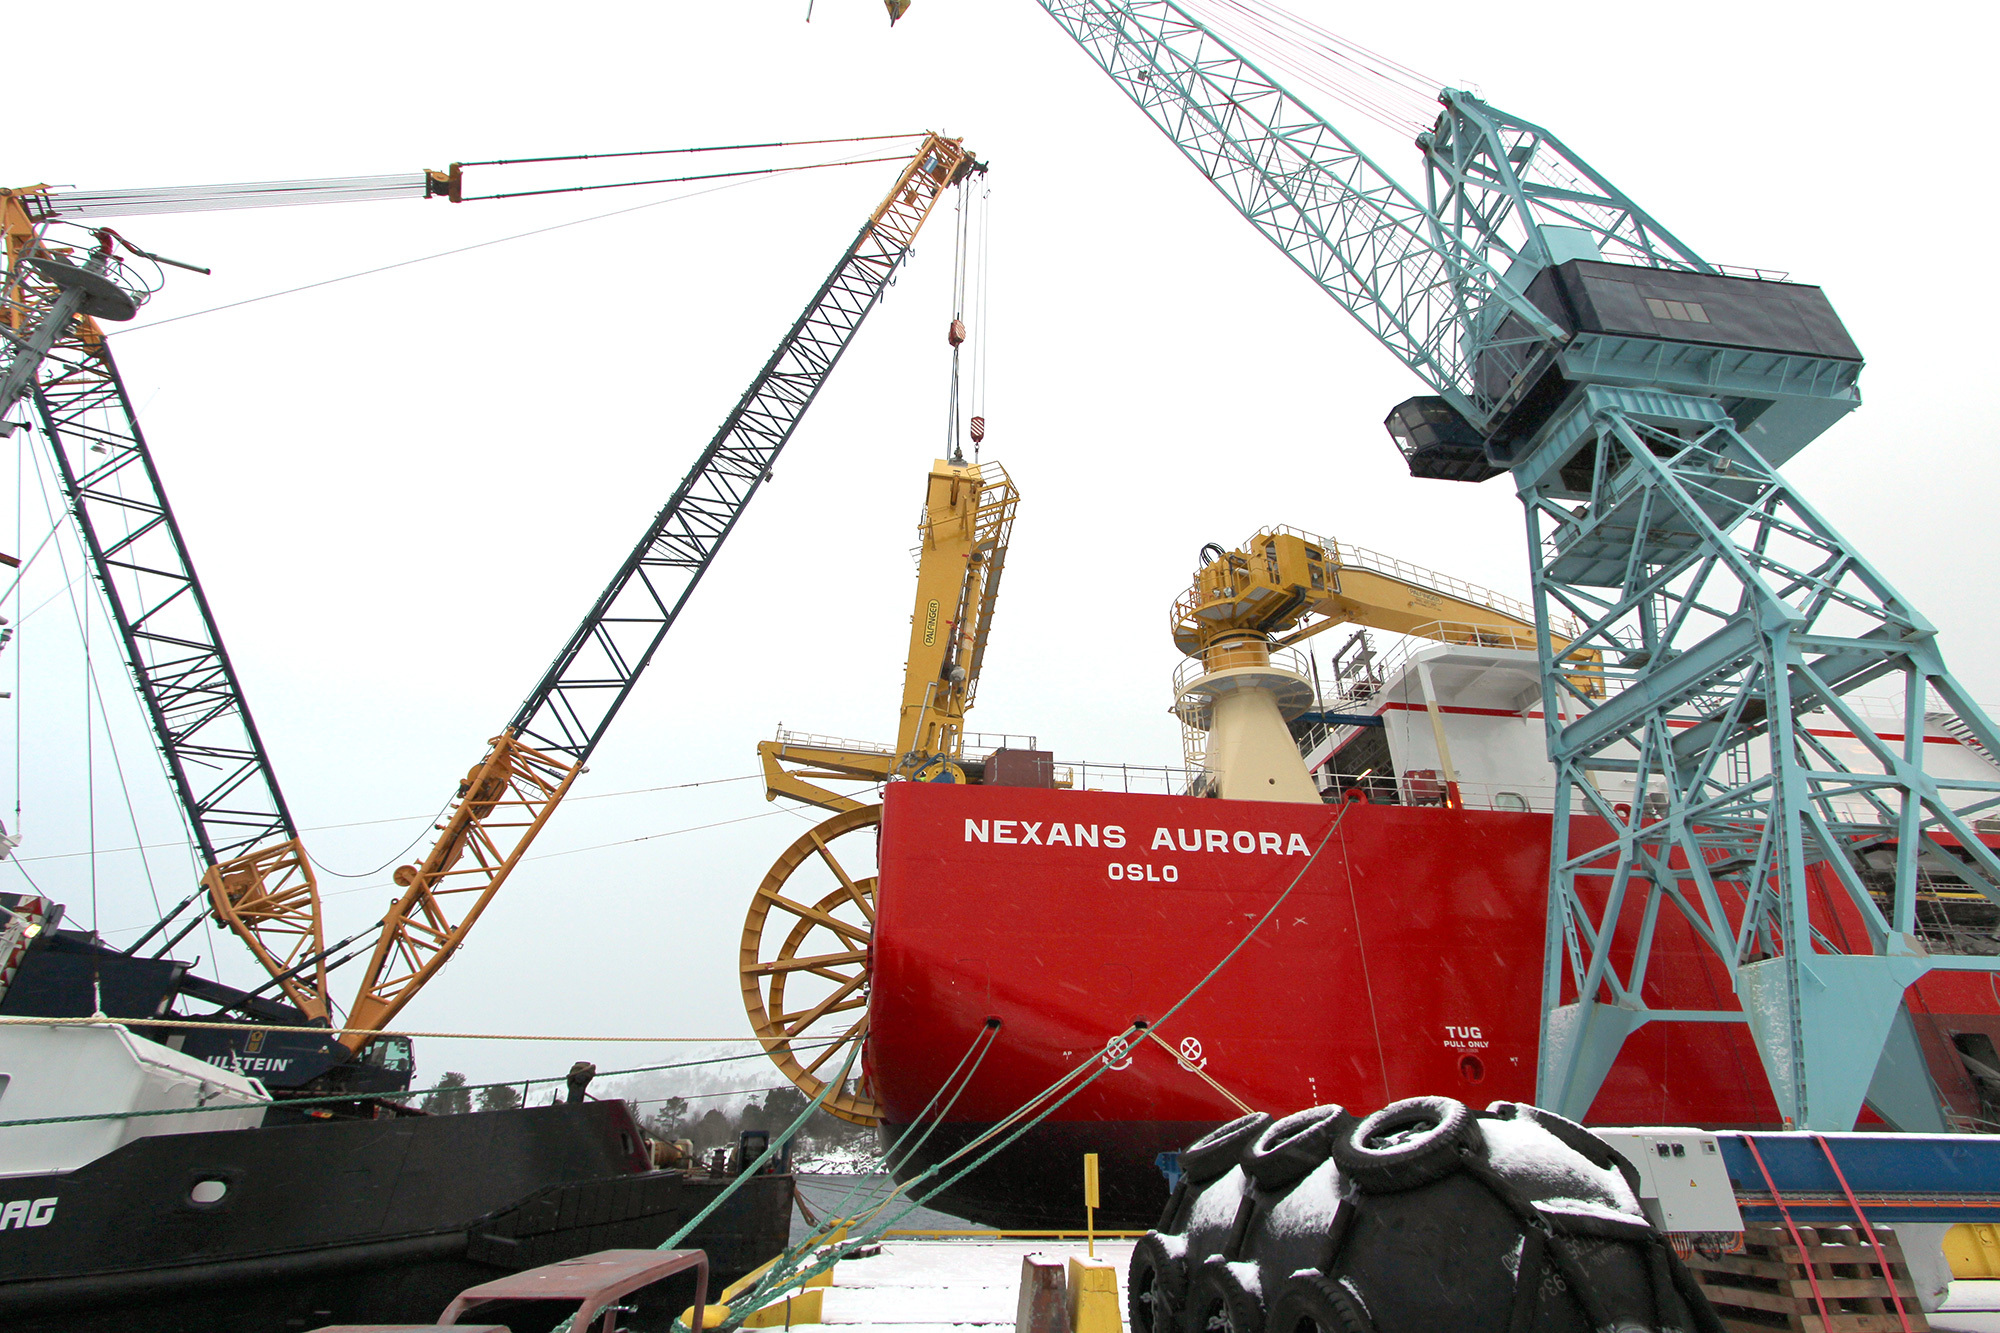 The Demag CC2800-1 crawler crane has a capacity of lifting 400t while on the barge. The lift of the 150t A-frame was carried out without difficulties.